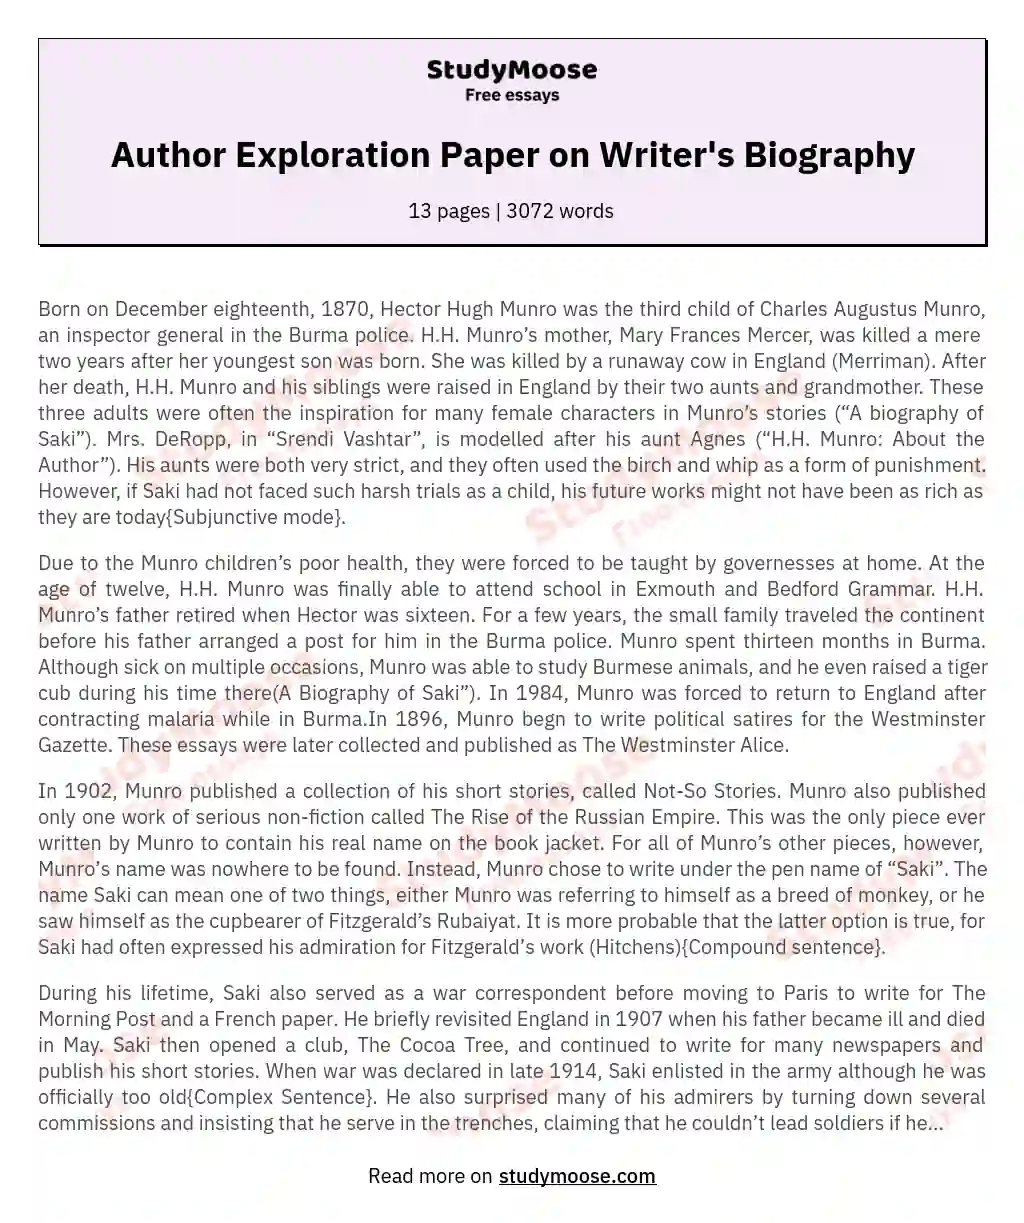 Author Exploration Paper on Writer's Biography